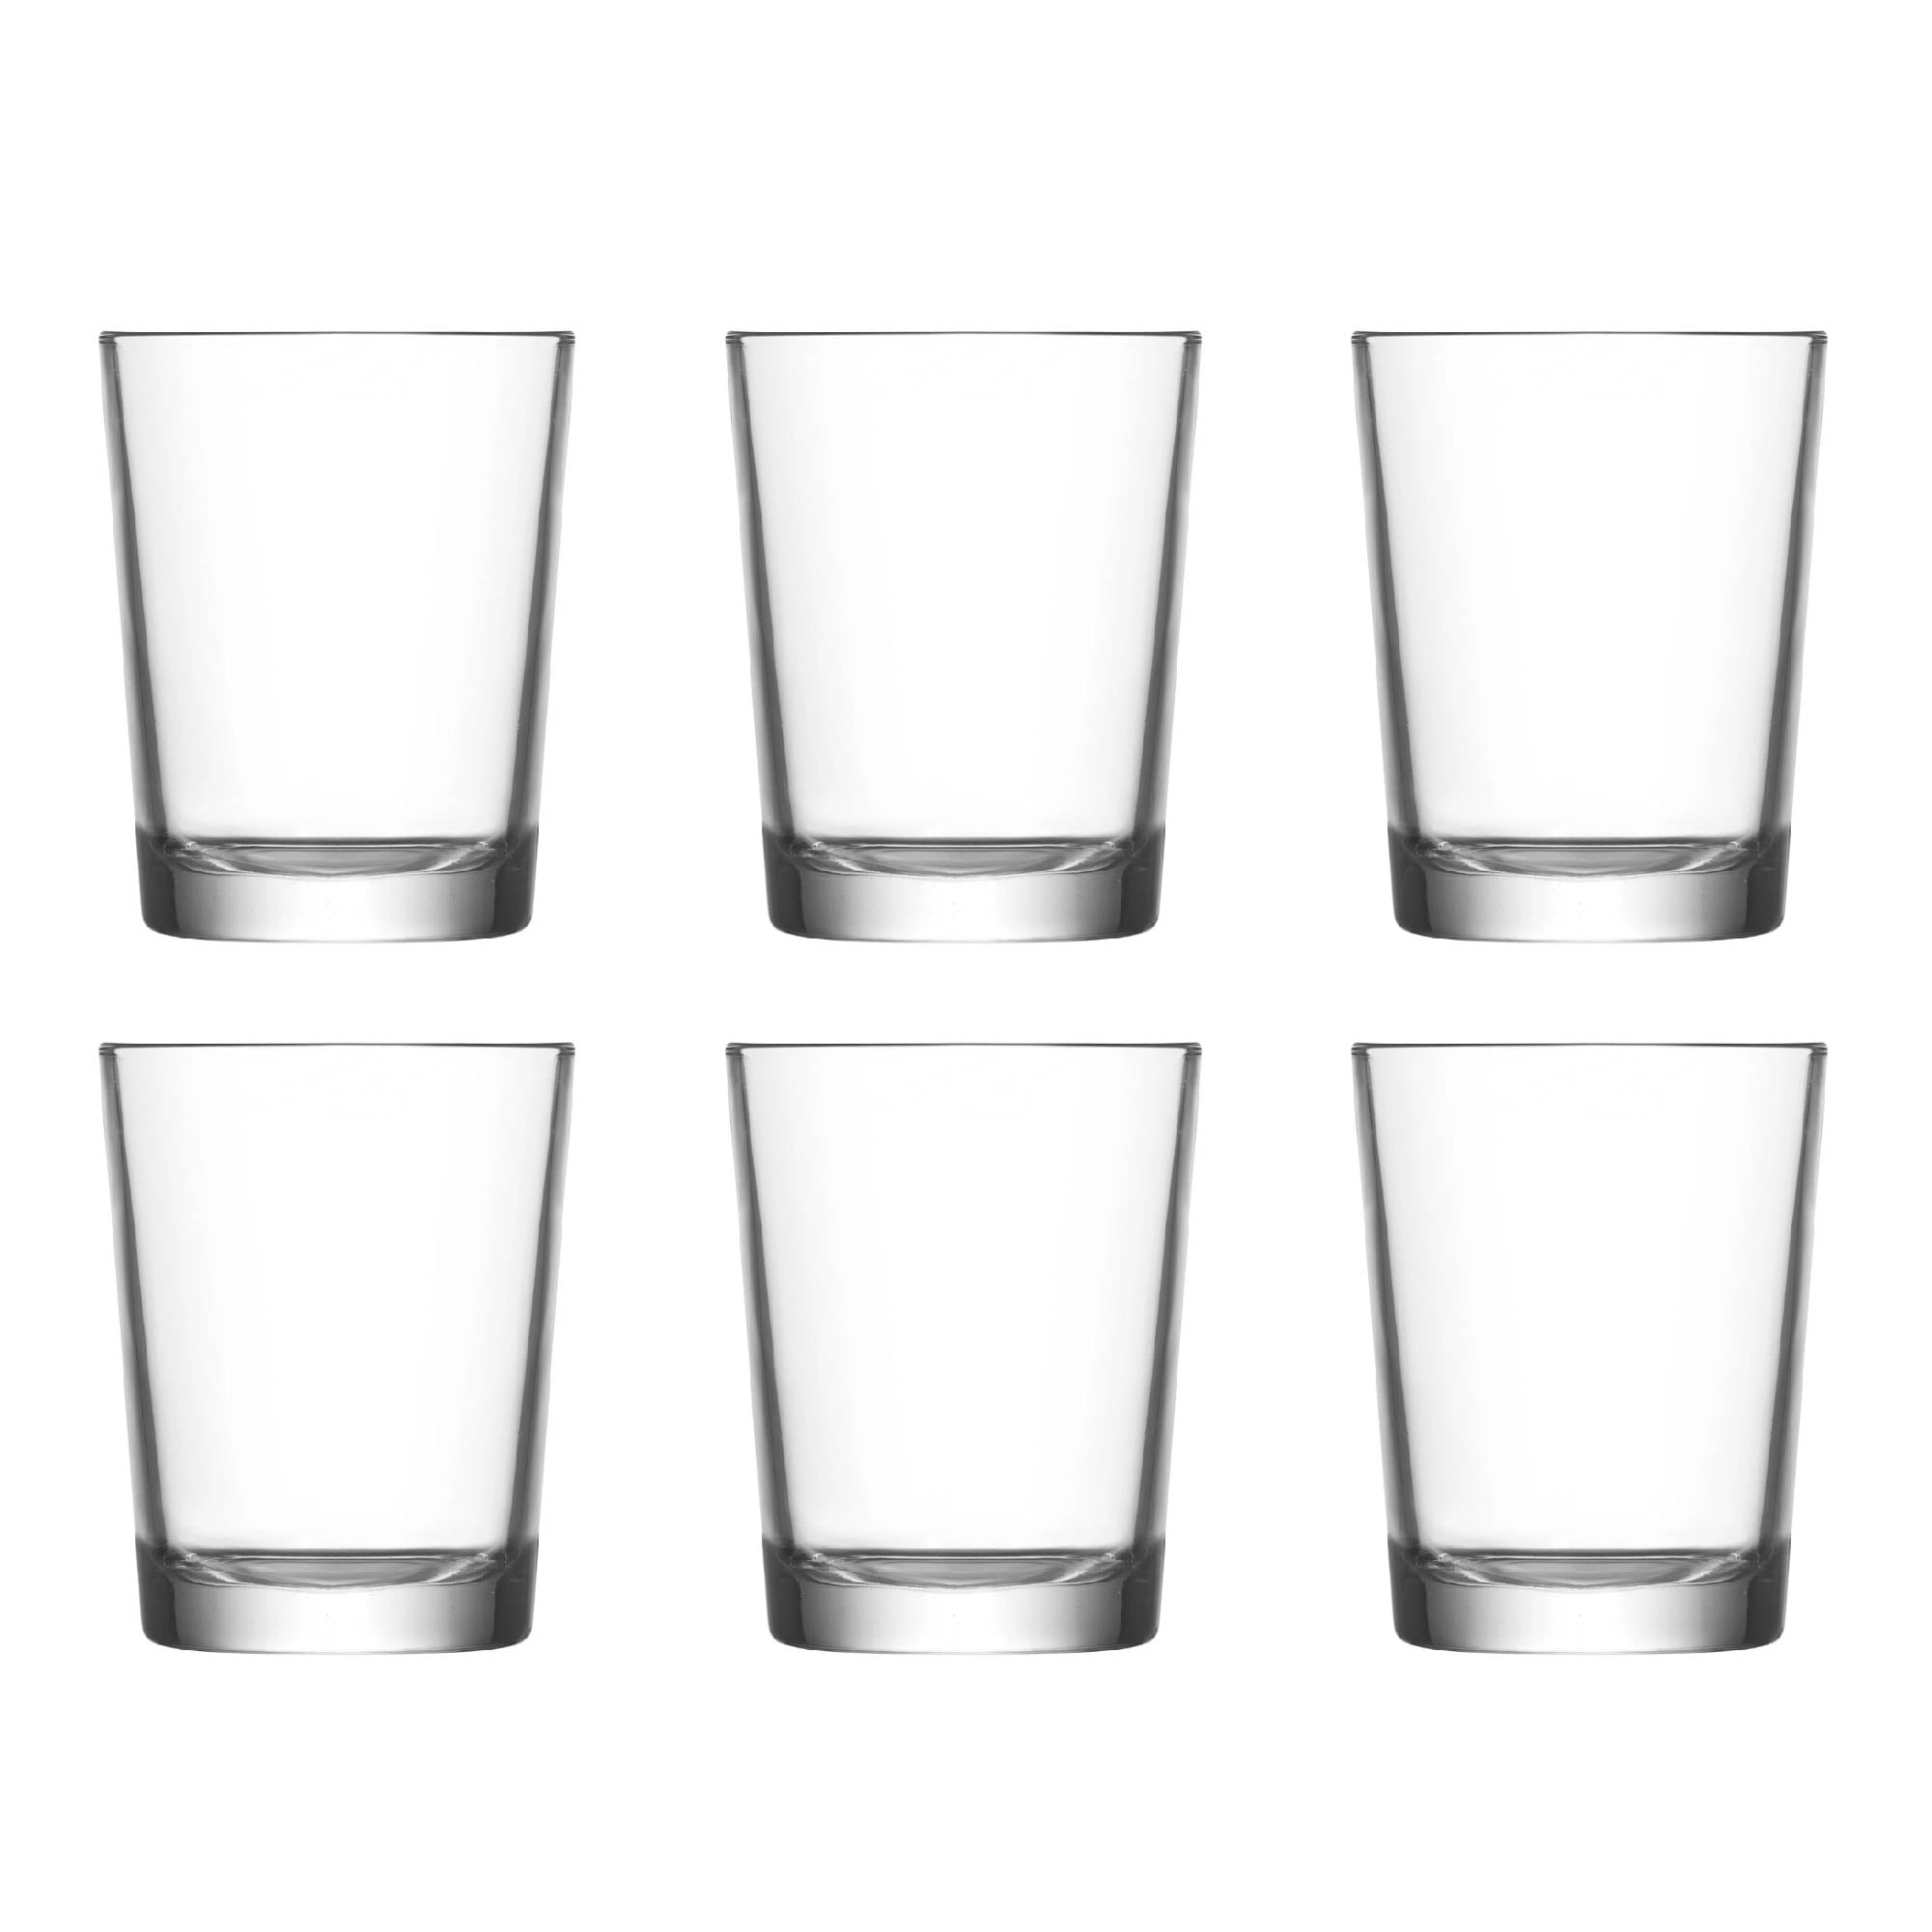 LAV Water Glass Set, Butterfly Design Drinking Glasses, Textured Water Cups,  6 Pcs, 8.5 Oz (255 cc) 